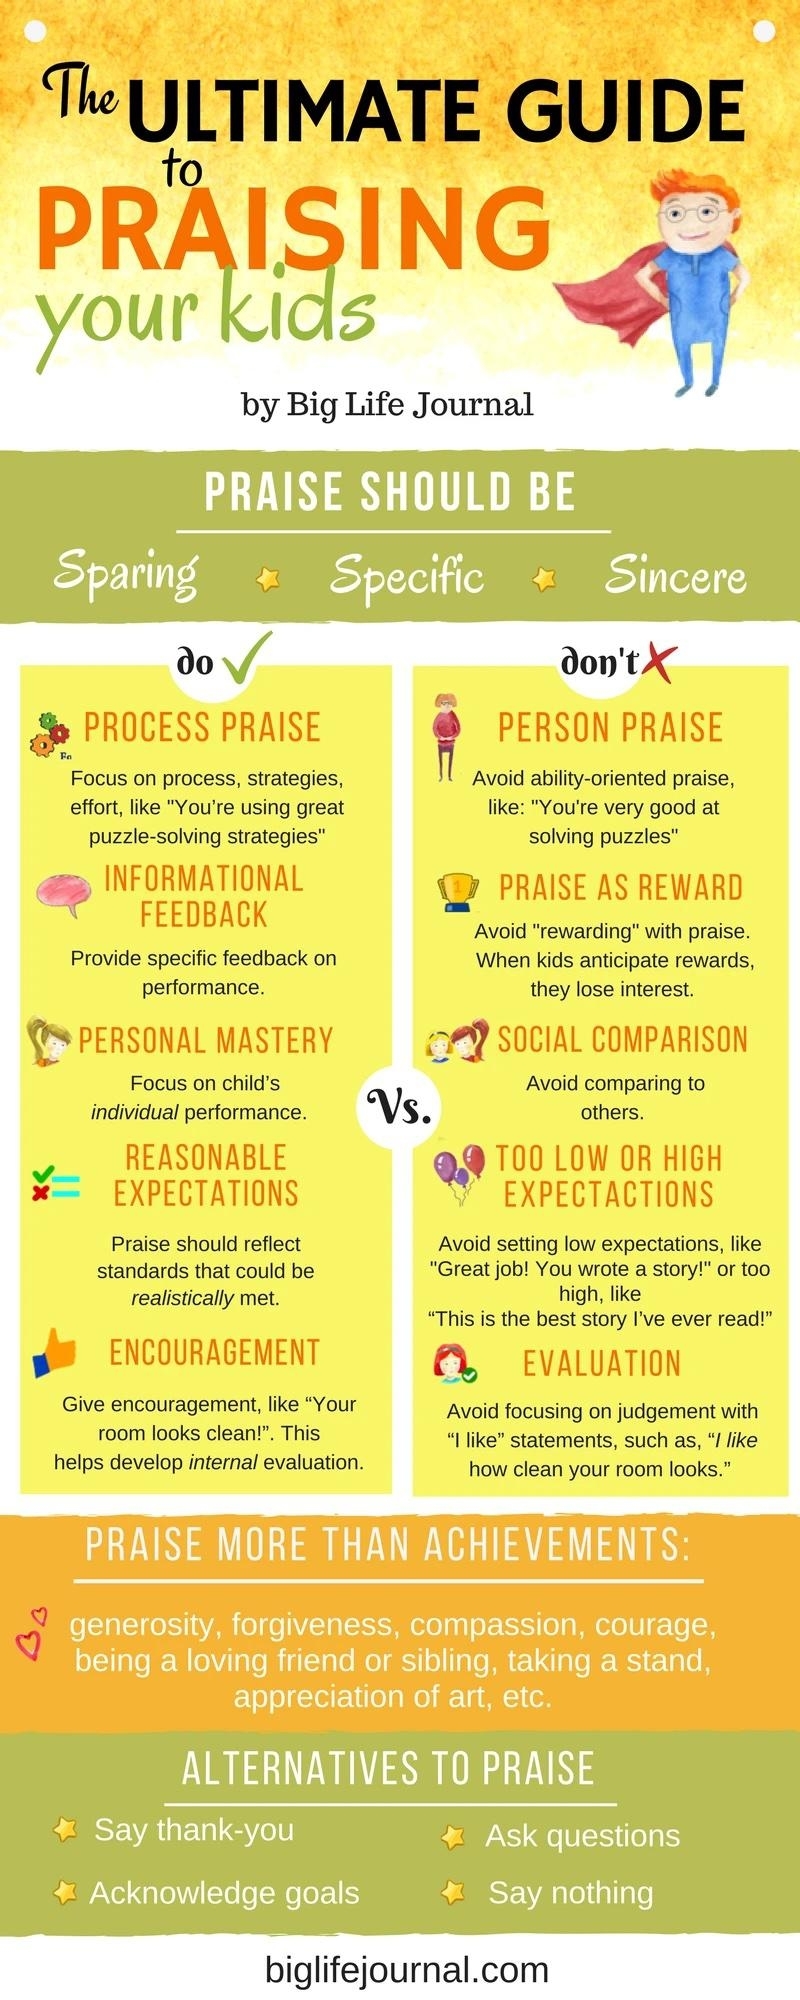 List of dos (do process praise) and don&#x27;ts (don&#x27;t person praise or use praise as reward), praise more than just achievements, and alternatives to praise (say &quot;thank you,&quot; acknowledge goals)